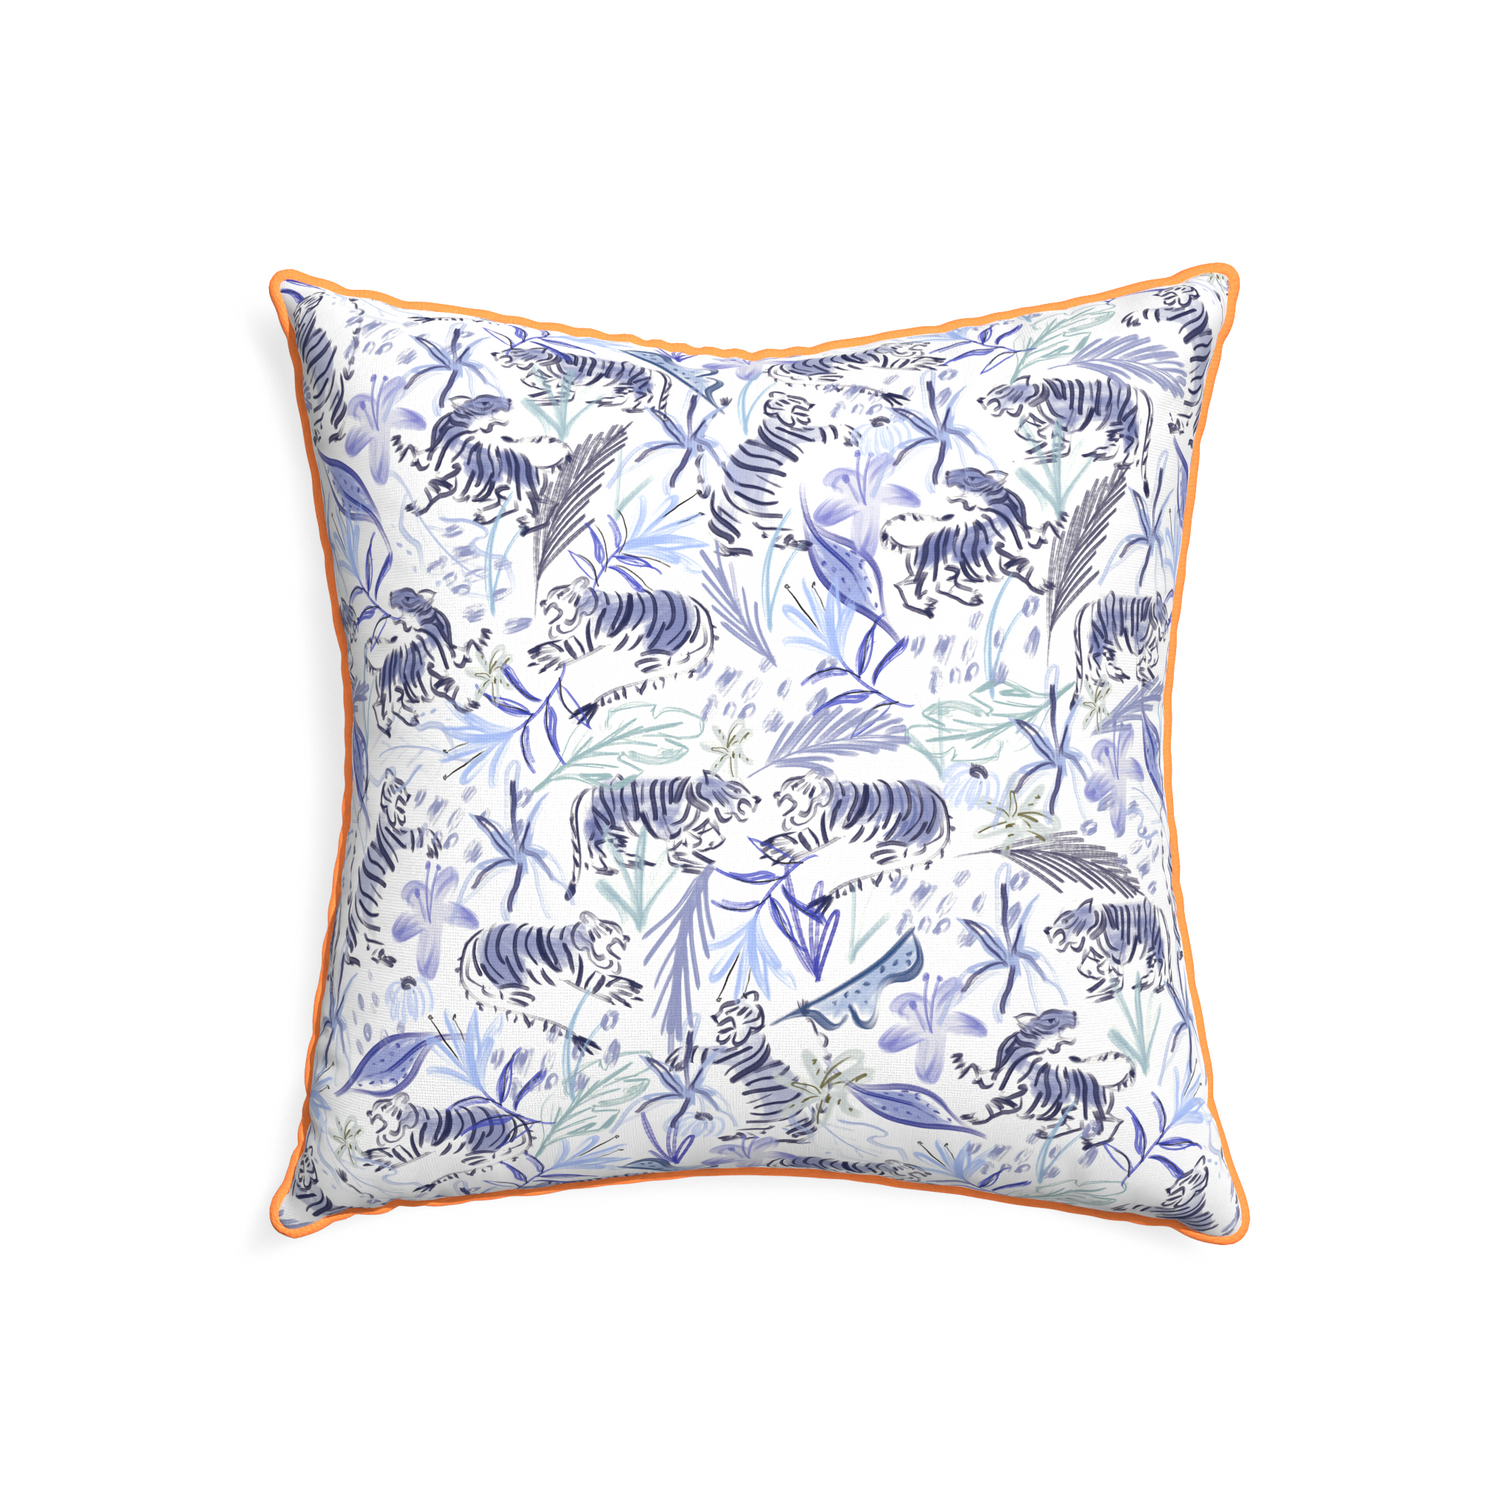 22-square frida blue custom blue with intricate tiger designpillow with clementine piping on white background